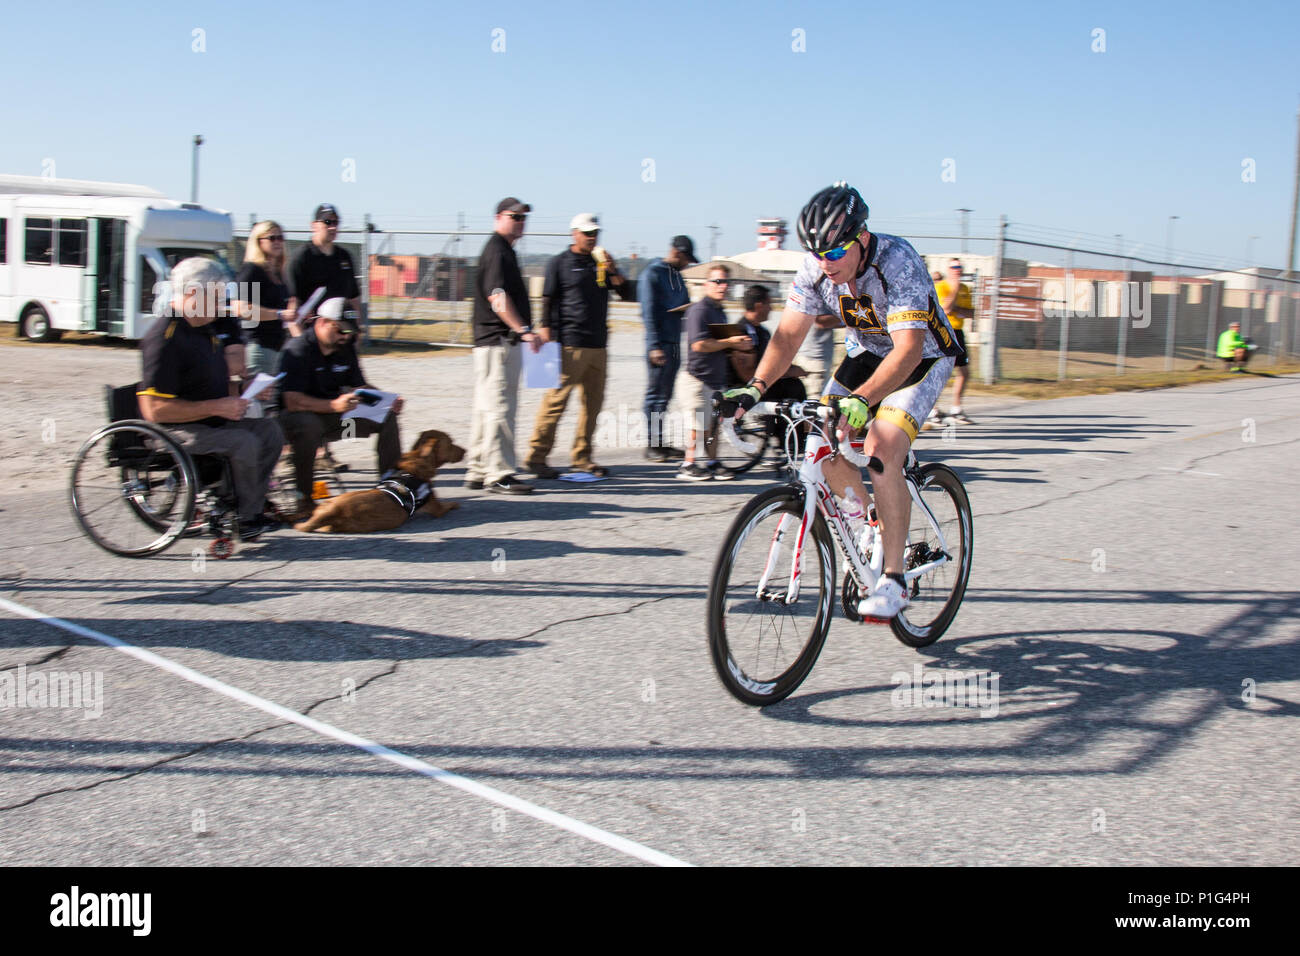 U.S. Army Lt. Col. Walter Castro, Fort Benning, finishes lap 2 of a 30k time trial during the Regional Health Command - Atlantic 2016 Warrior Games Regional Trials, at Lawson Army Airfield, on Fort Benning, Ga., October 31, 2016. The Regional Health Command - Atlantic is one of four Army regional health command's hosting regional trials across the country. Regional competitors who excel in the qualifying events will advance to the Army Warrior Games at Fort Bliss, Texas in February 2017.  (U.S. Army Photo by Staff Sgt. Brian Kohl) Stock Photo